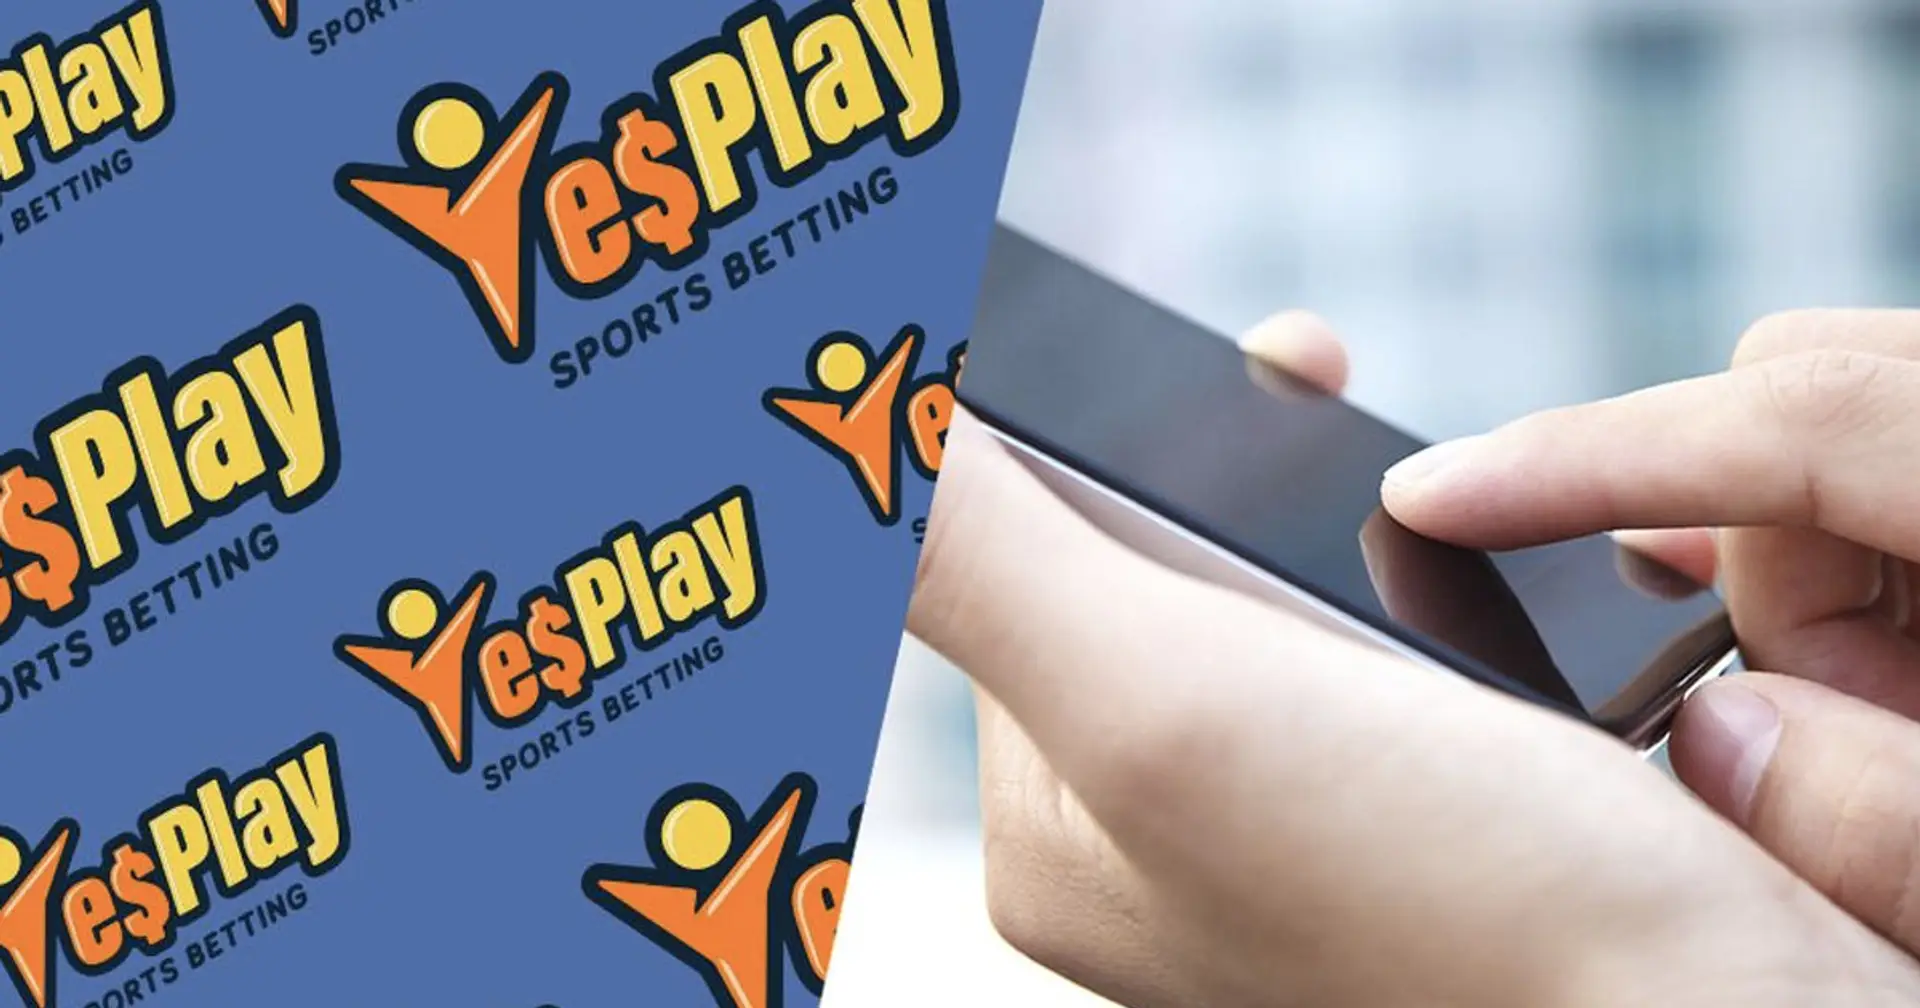 Yesplay App: Your Ultimate Guide to Download and Install